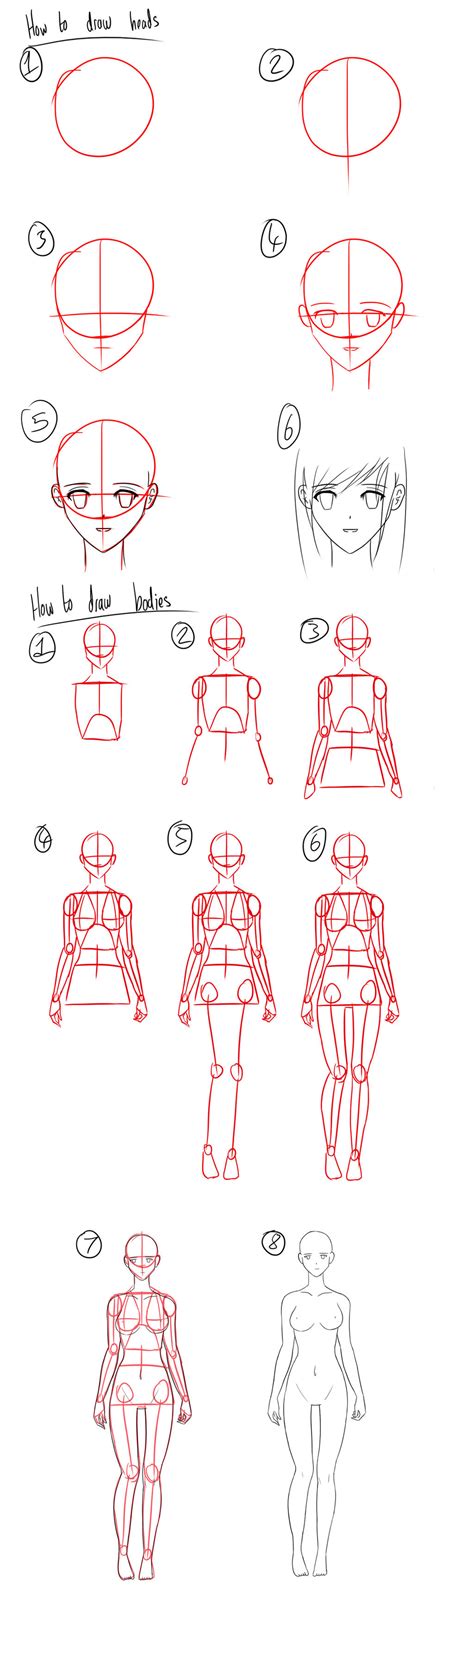 Tutorial How To Draw Anime Heads Female Bodies By Micky K On Deviantart